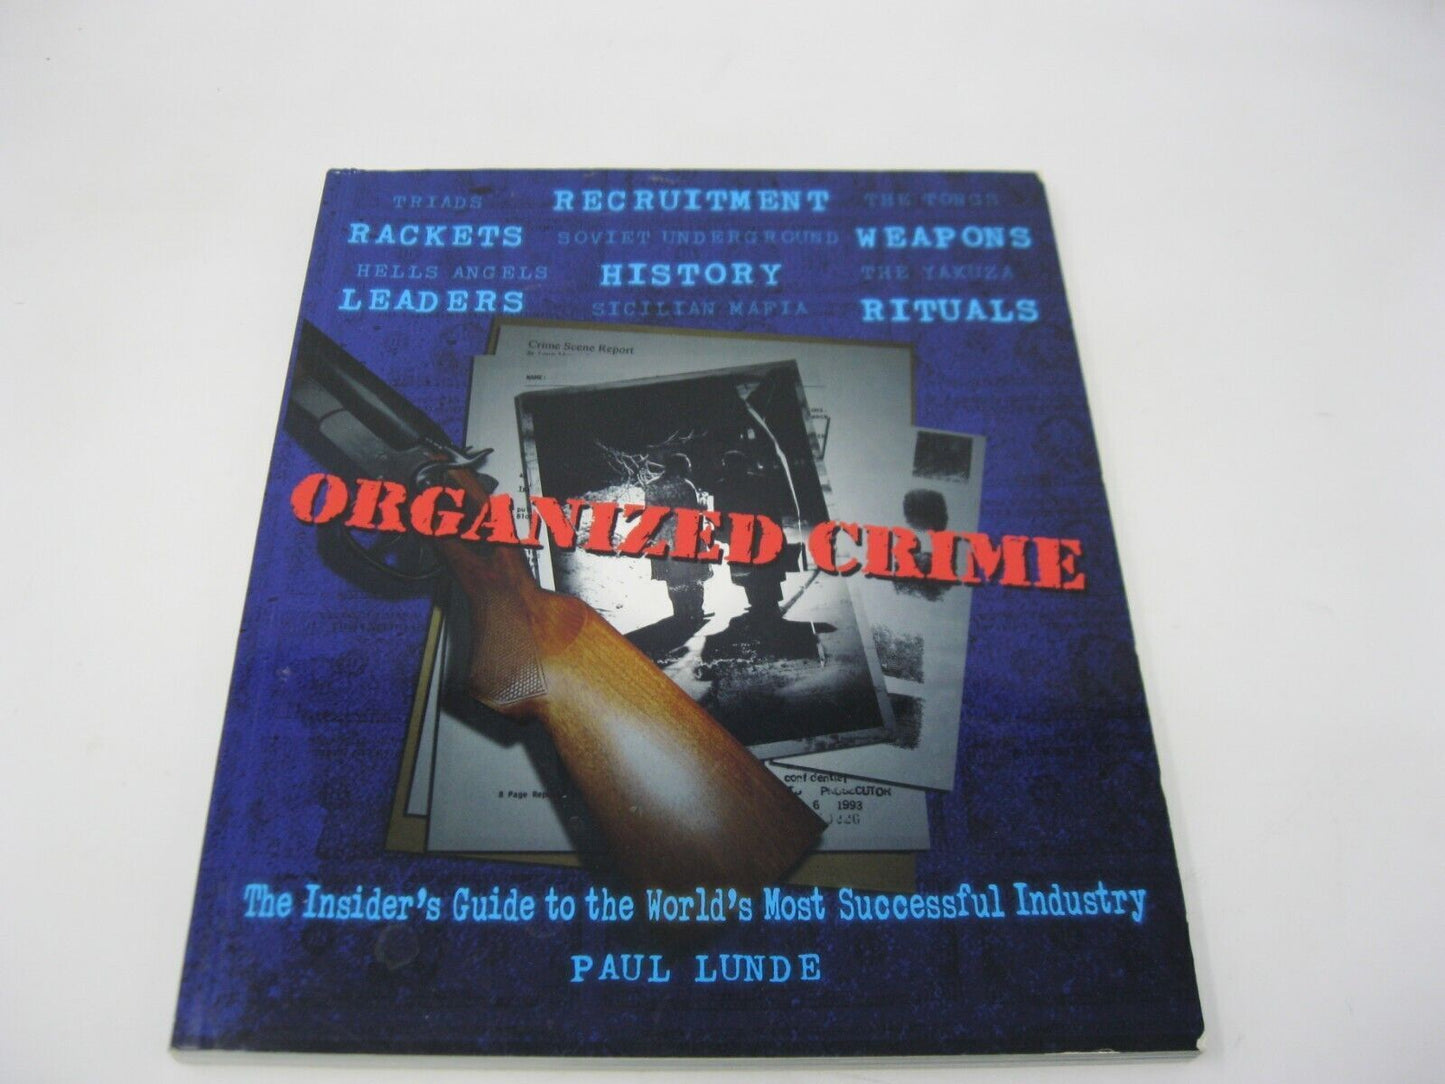 Organized Crime by Paul Lunde